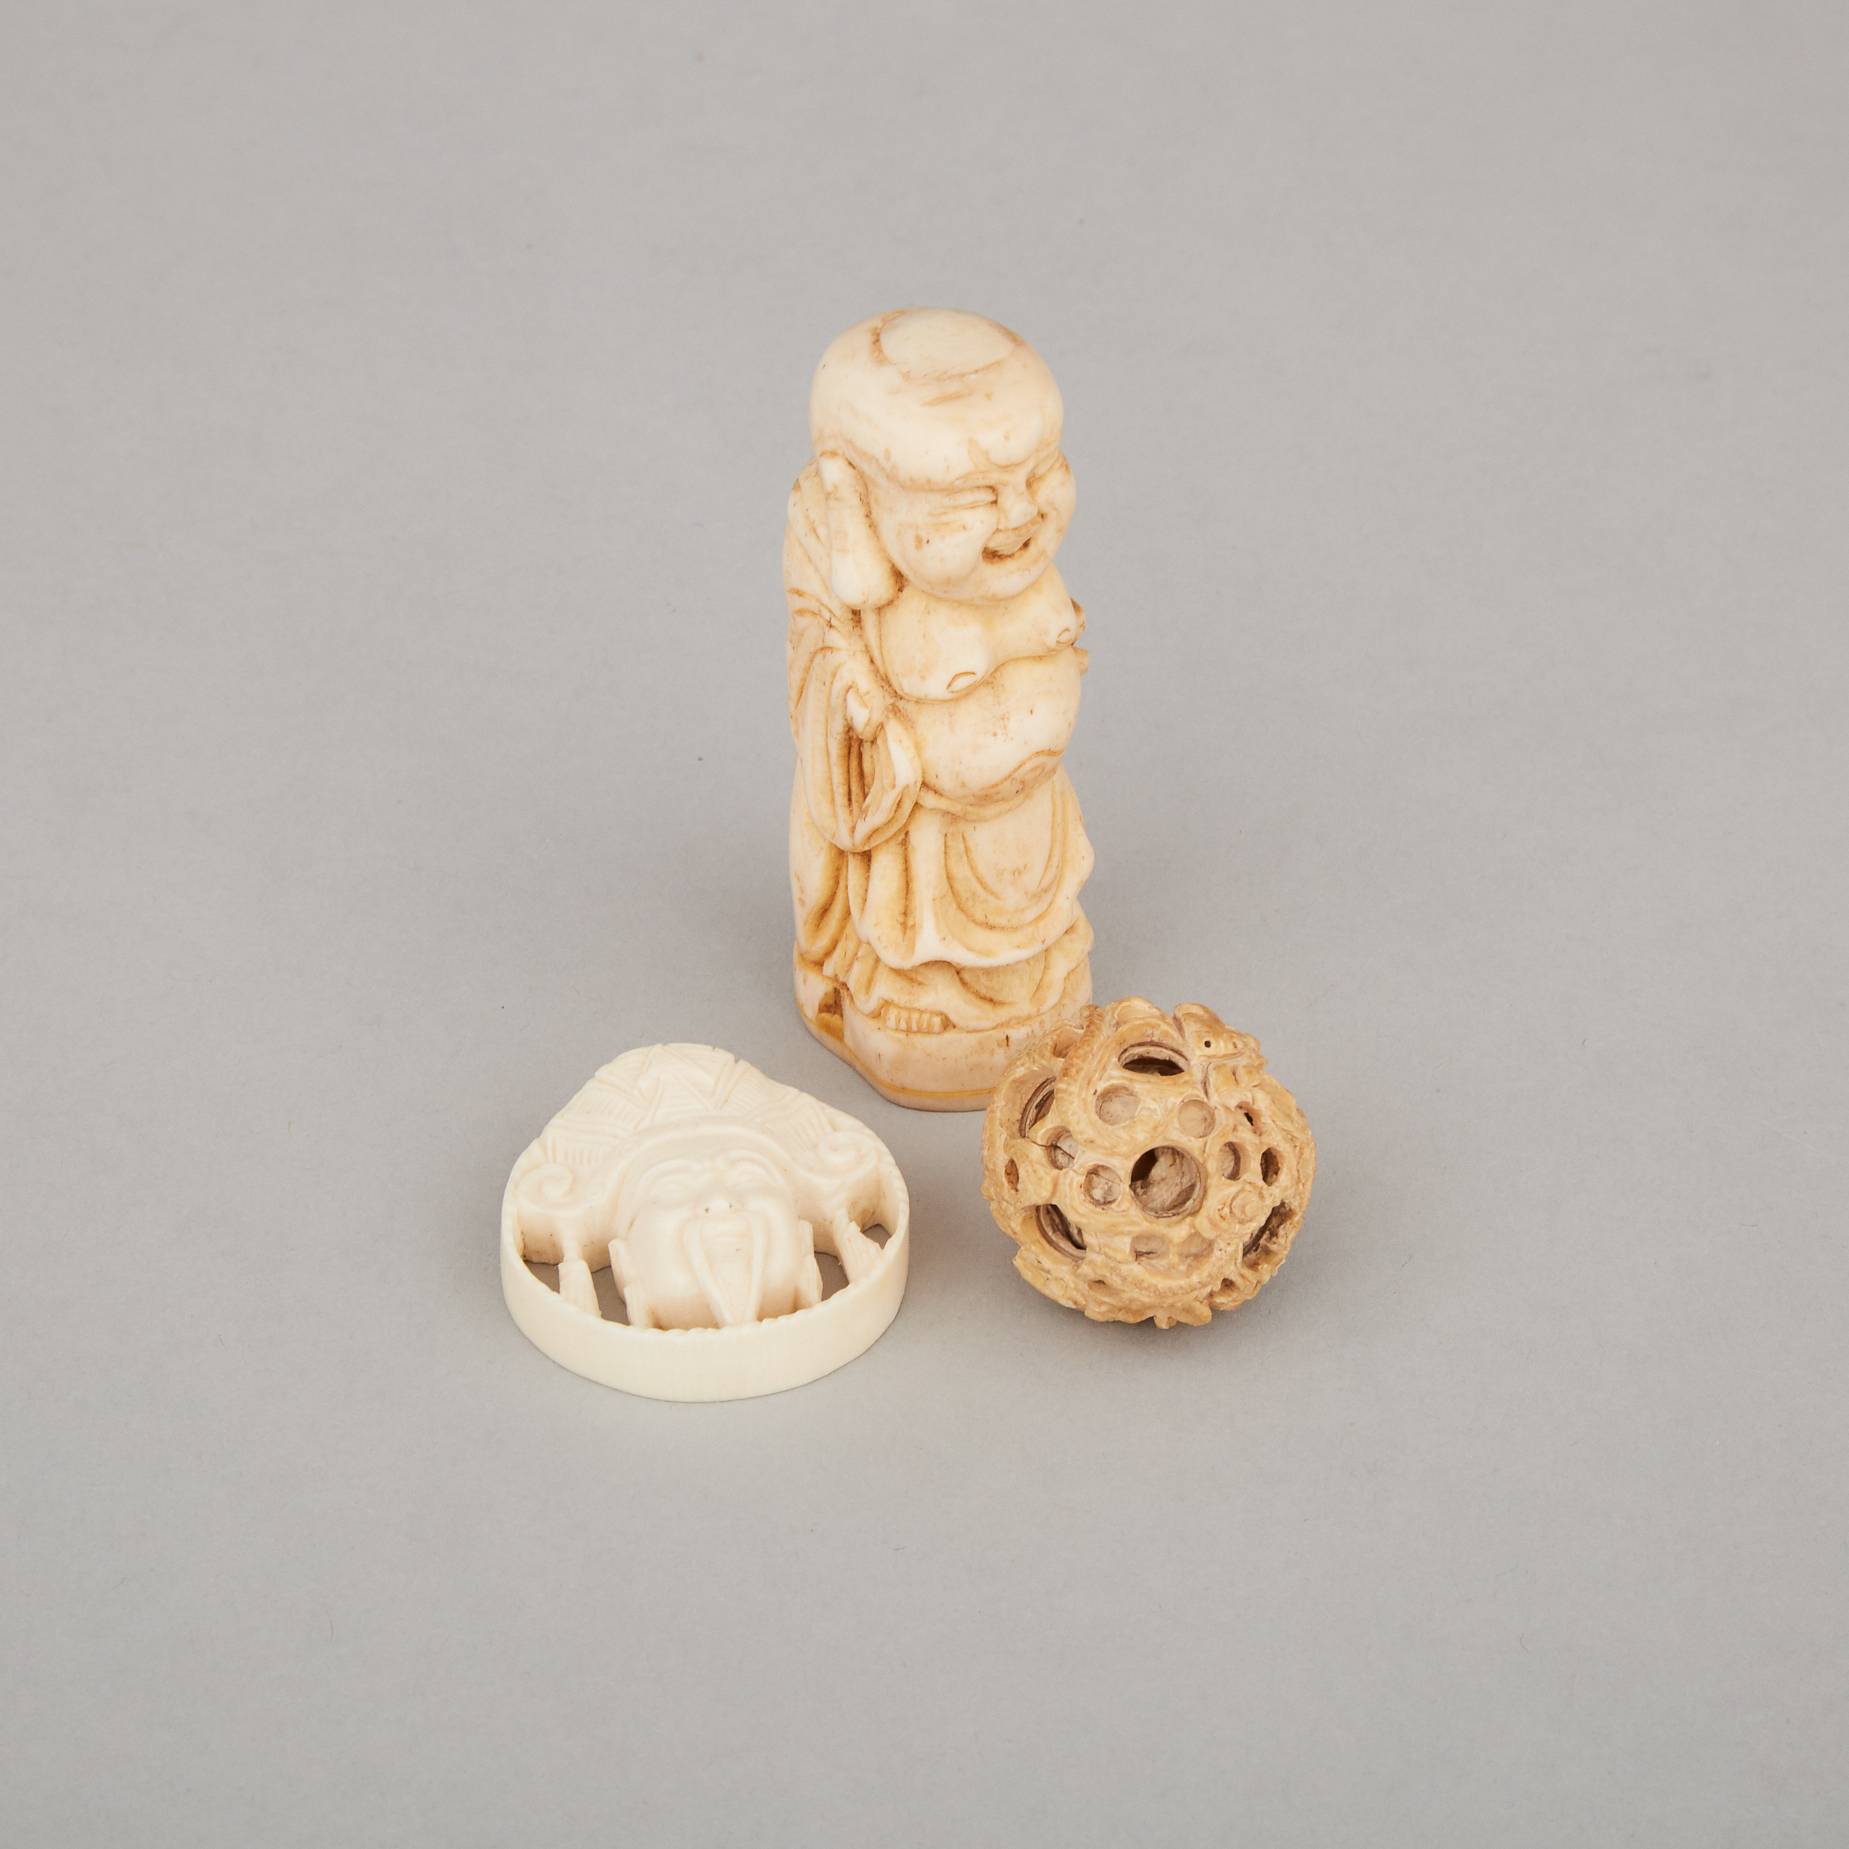 A Group of Three Ivory Carvings, Early 20th Century